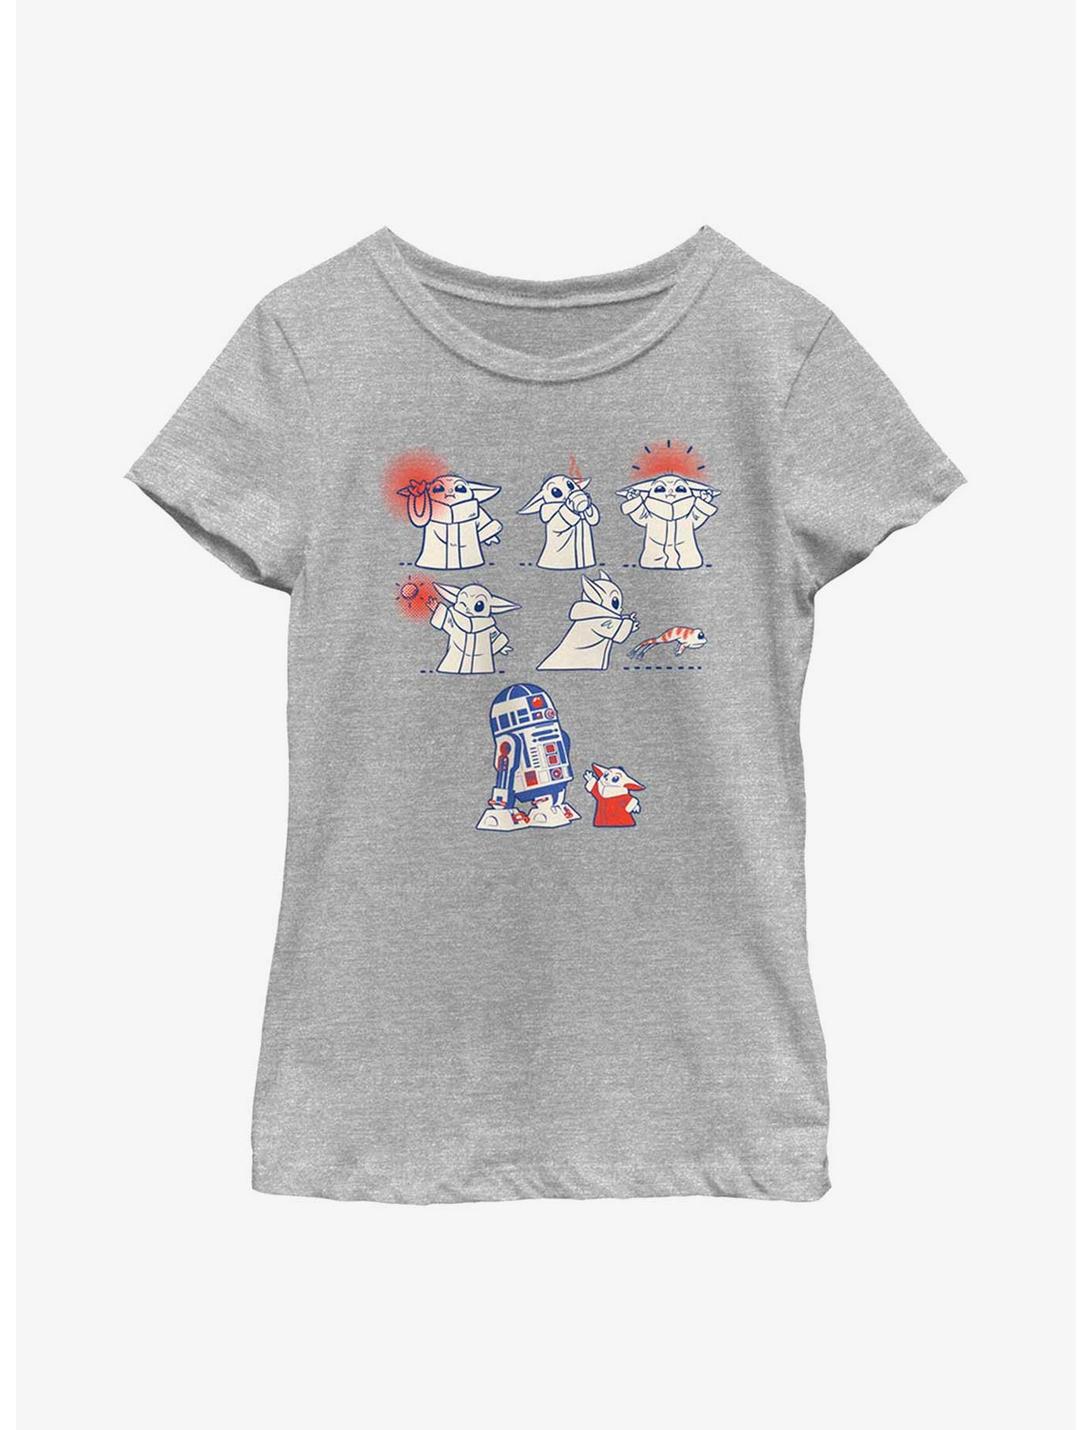 Star Wars The Mandalorian The Child Flag Youth Girls T-Shirt, ATH HTR, hi-res